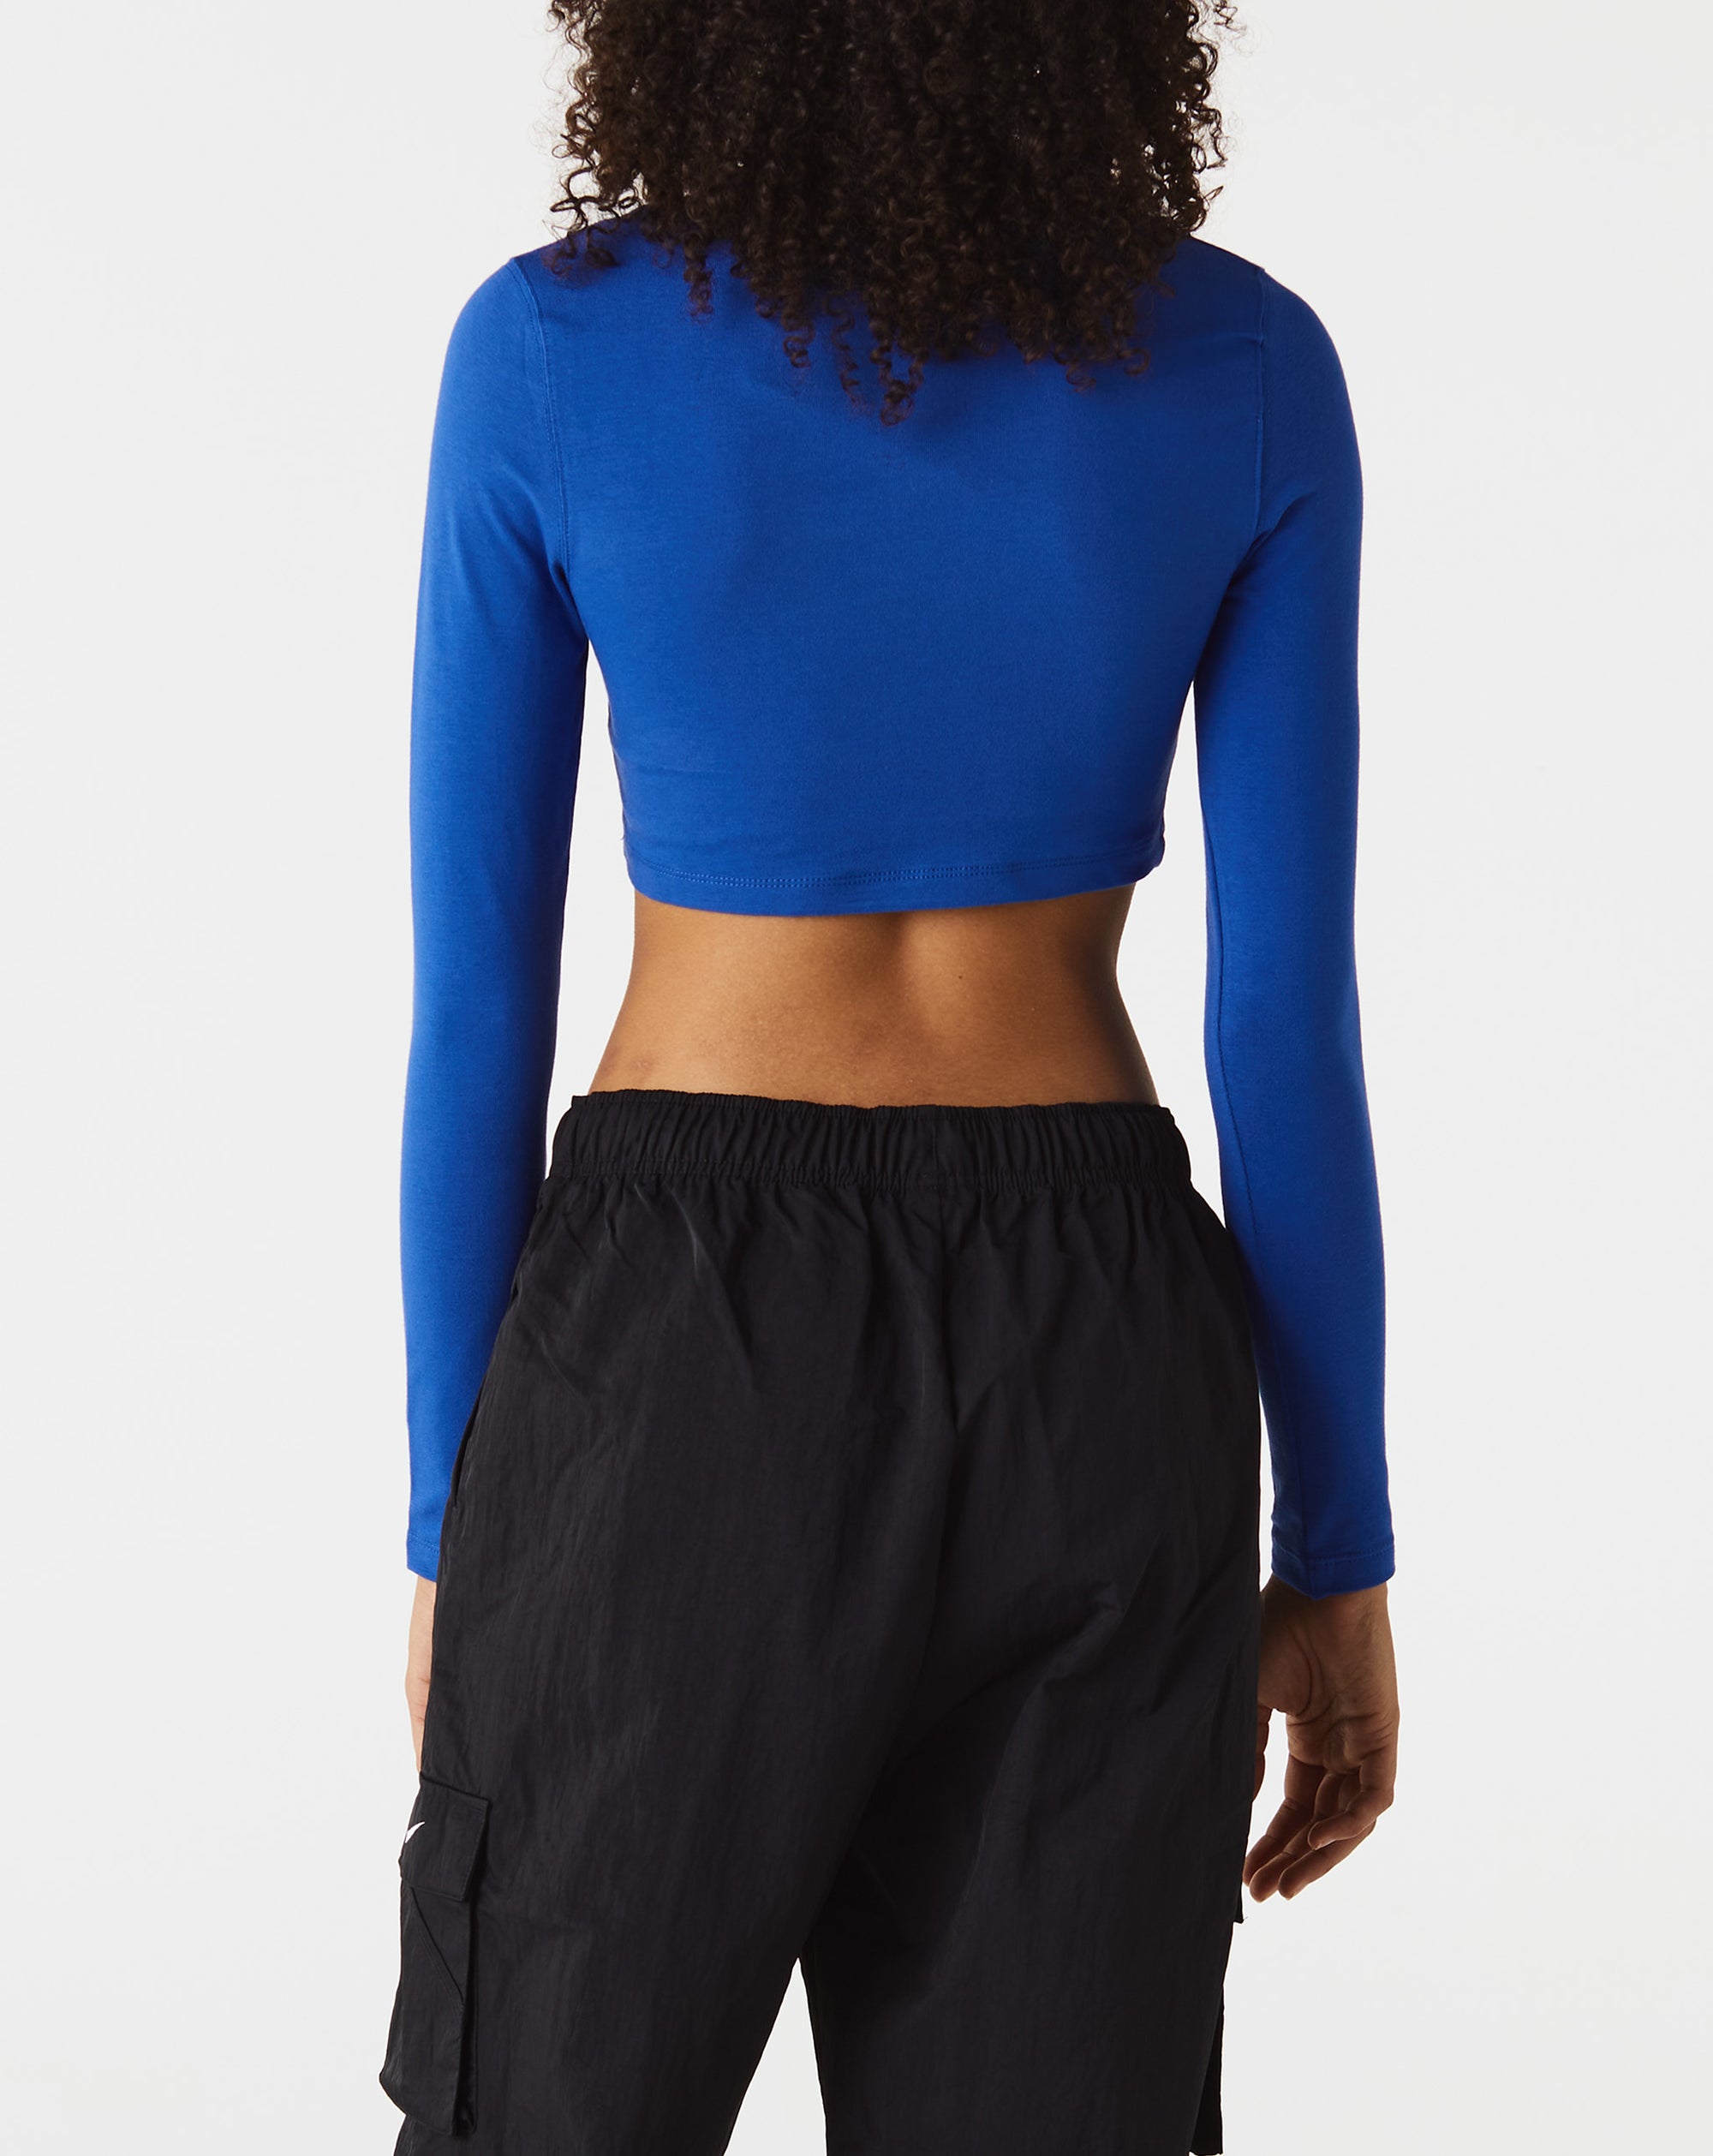 Nike Women's NSW Cropped Top - Rule of Next Apparel